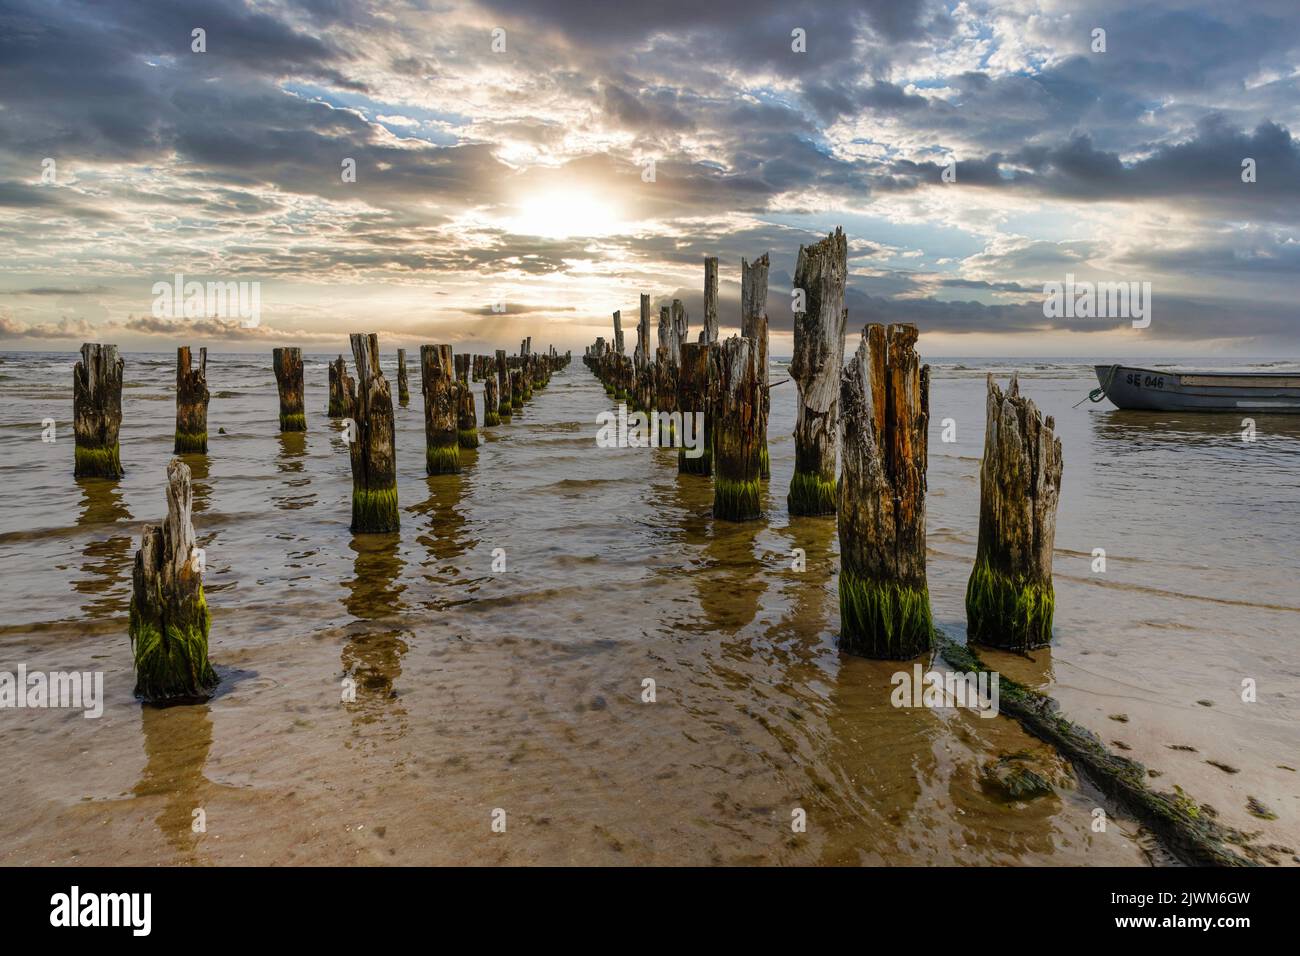 Old abandoned wooden pier or jetty remains and fishermen's boat Stock Photo